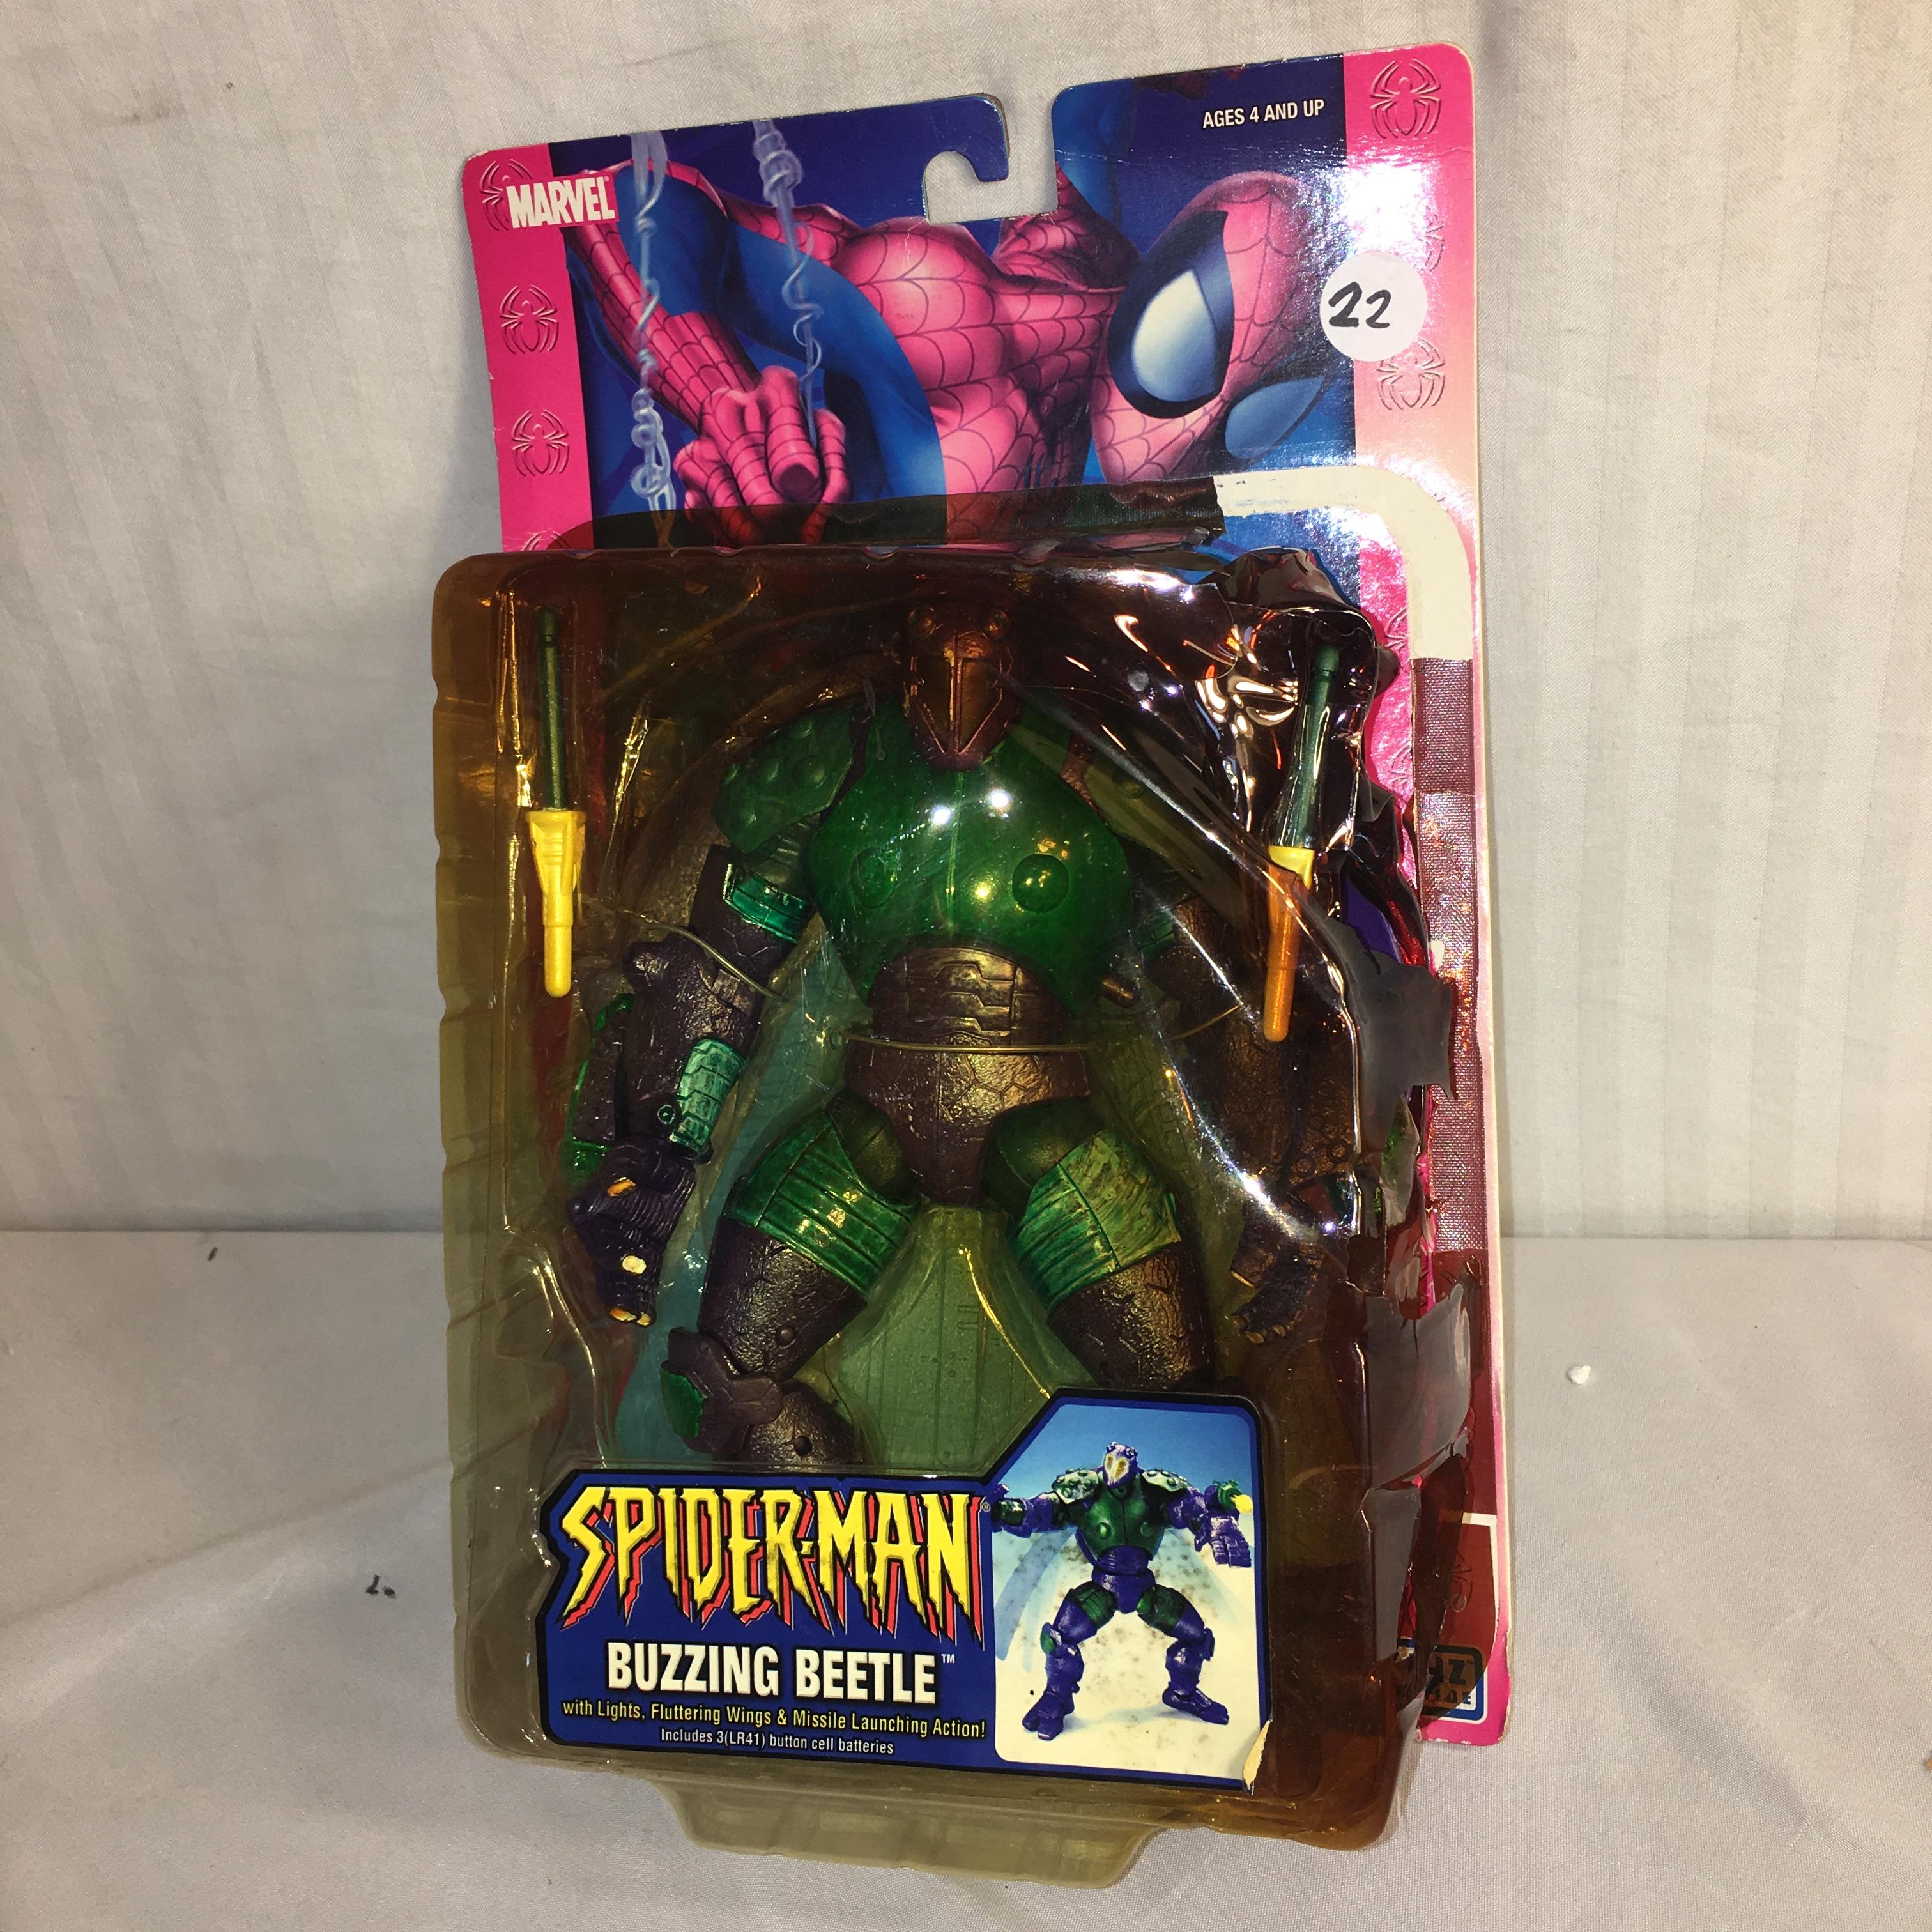 Collector Marvel Spider-man Buzzing Beetle Action Figure Size: 8-9"Tall Box Has Damage